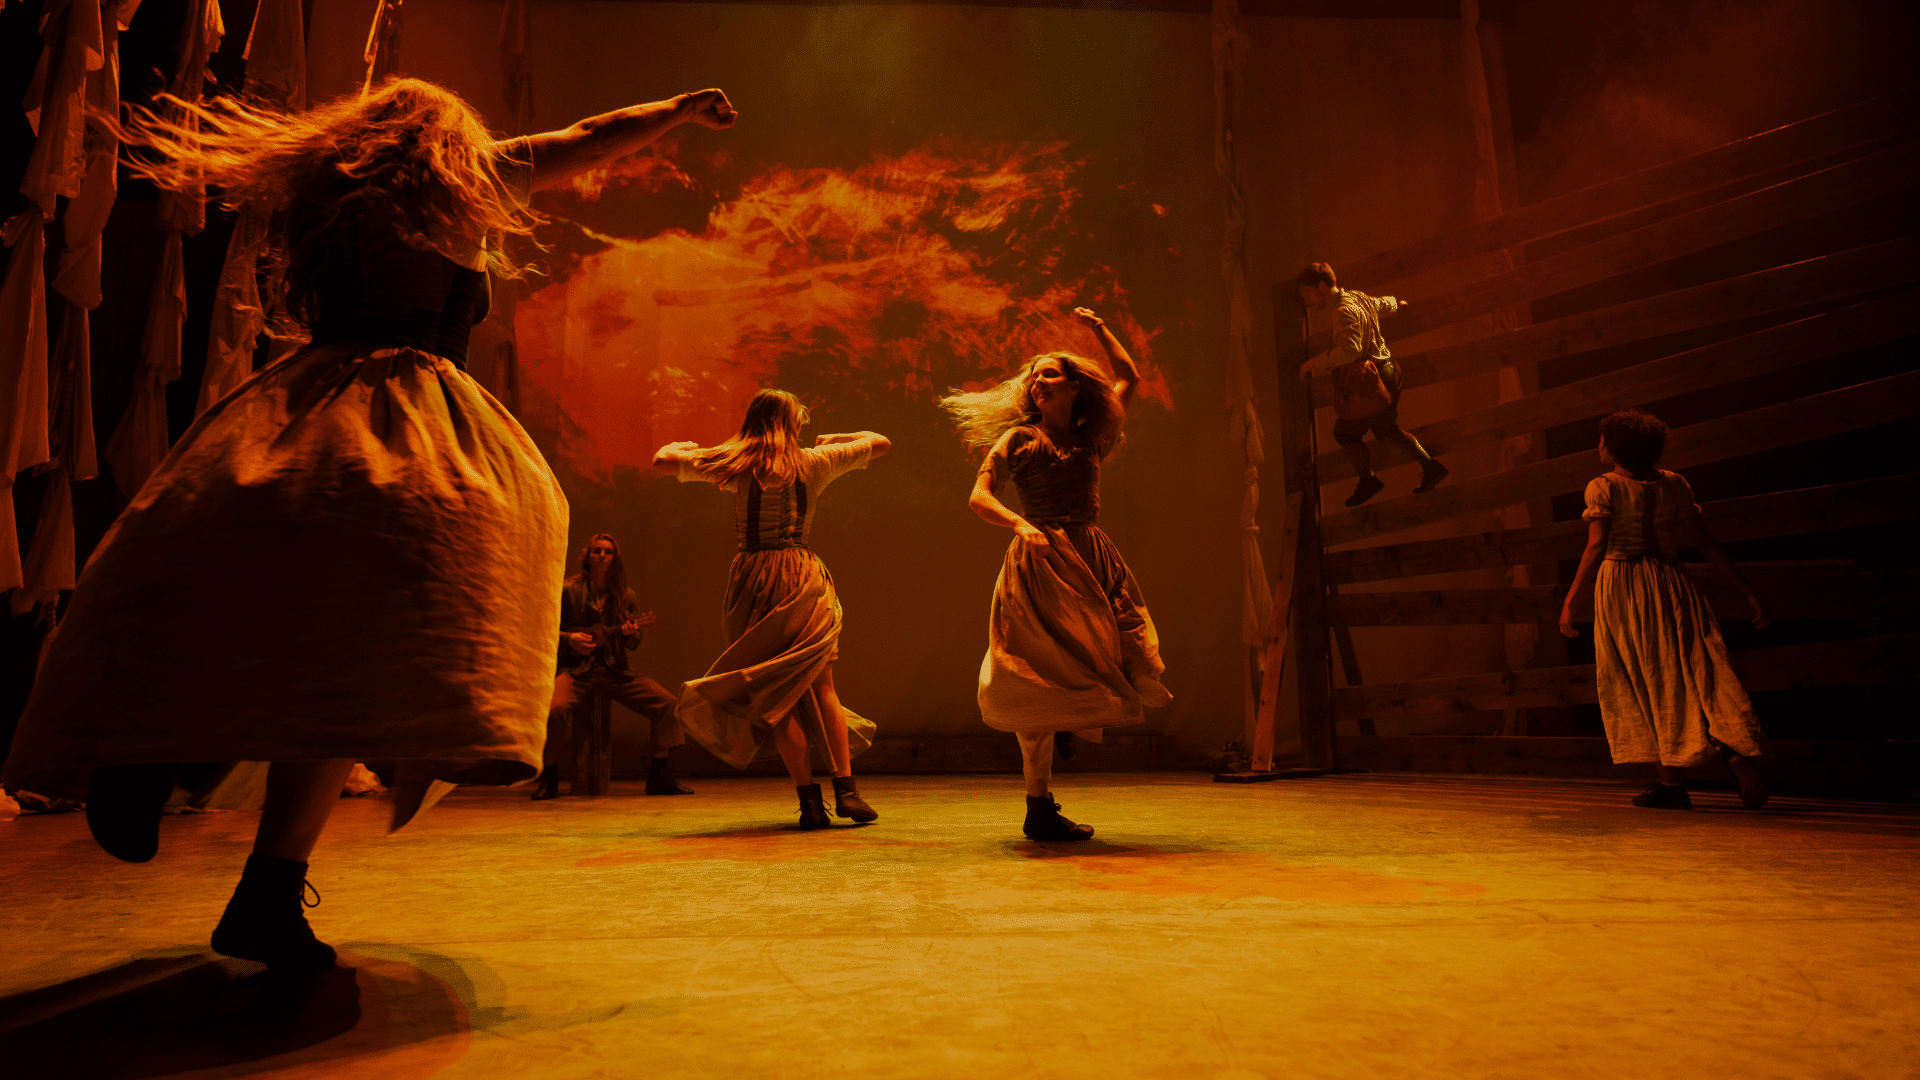 Tess production photo: four performers twirl in full-skirted white dresses, bathed in an orange glow; on the wall behind them, a red fire is projected.